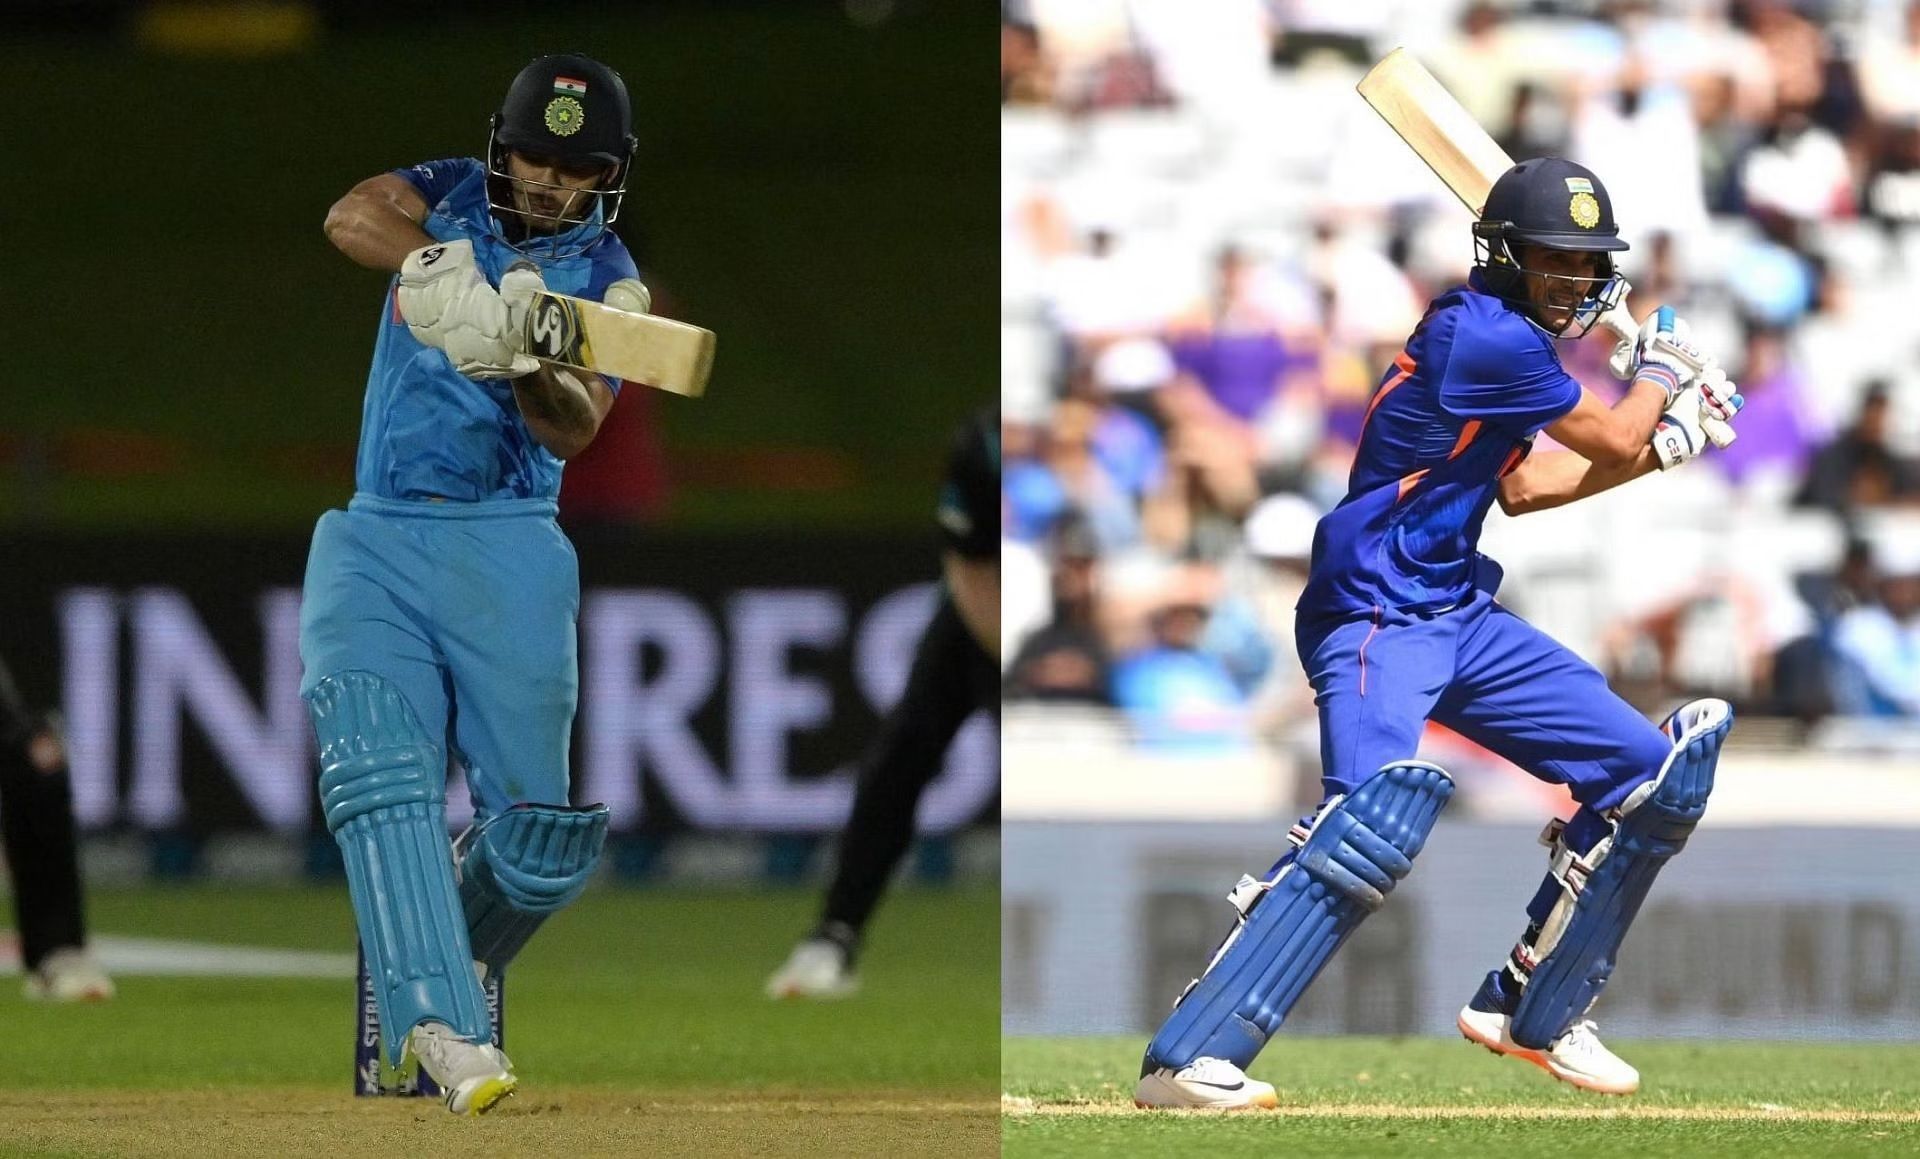 Ishan Kishan and Shubman Gill might vie for the opener